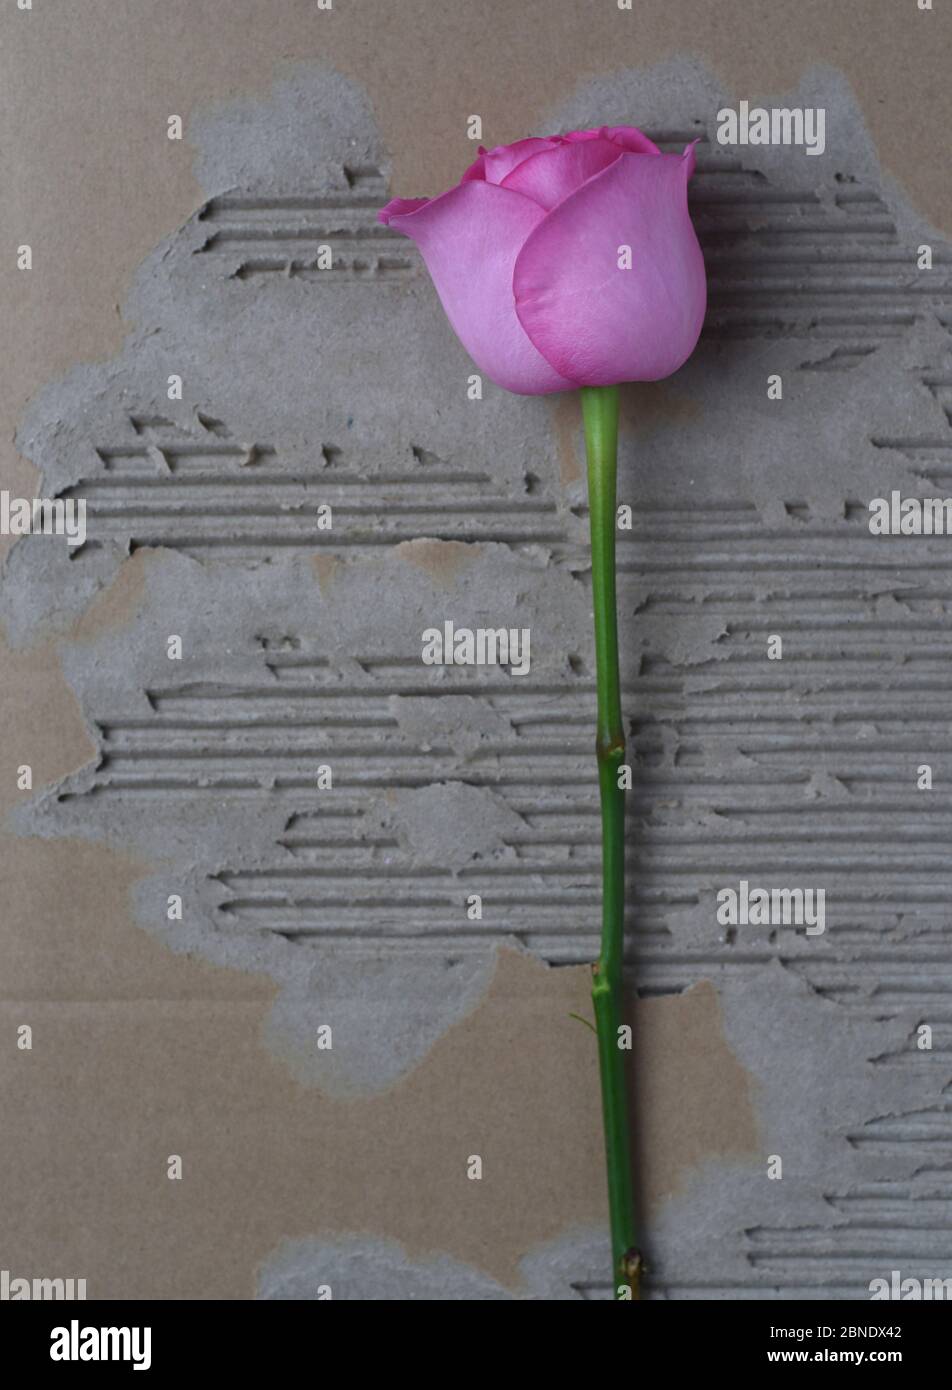 A vertical image of a pink rose bud flower with a long green stalk on a background of distressed and torn brown cardboard. Stock Photo